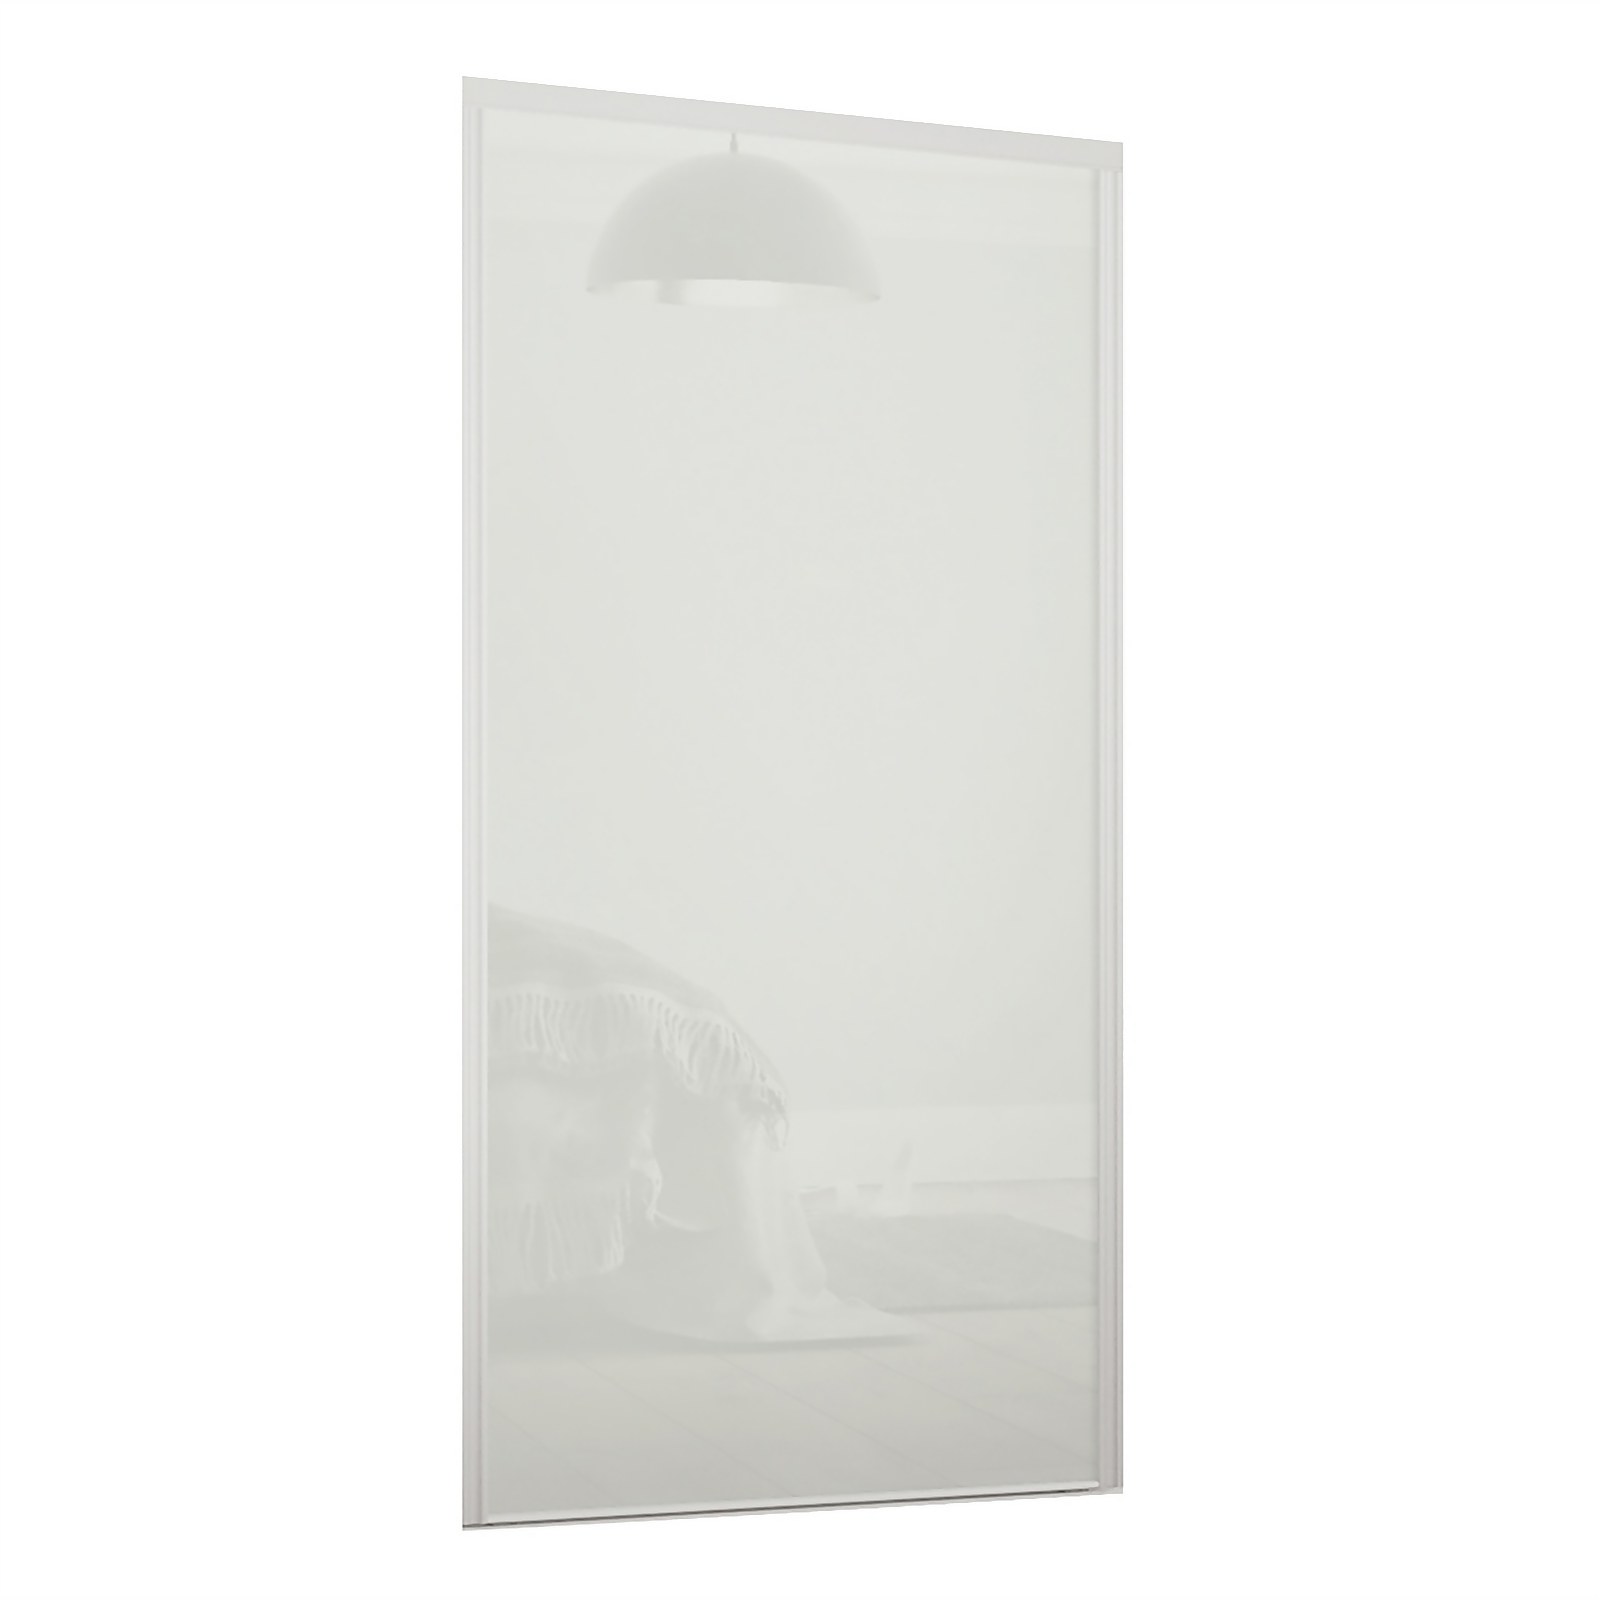 Photo of Loft Sliding Wardrobe Door Artic White Glass With Silver Frame -w-610mm